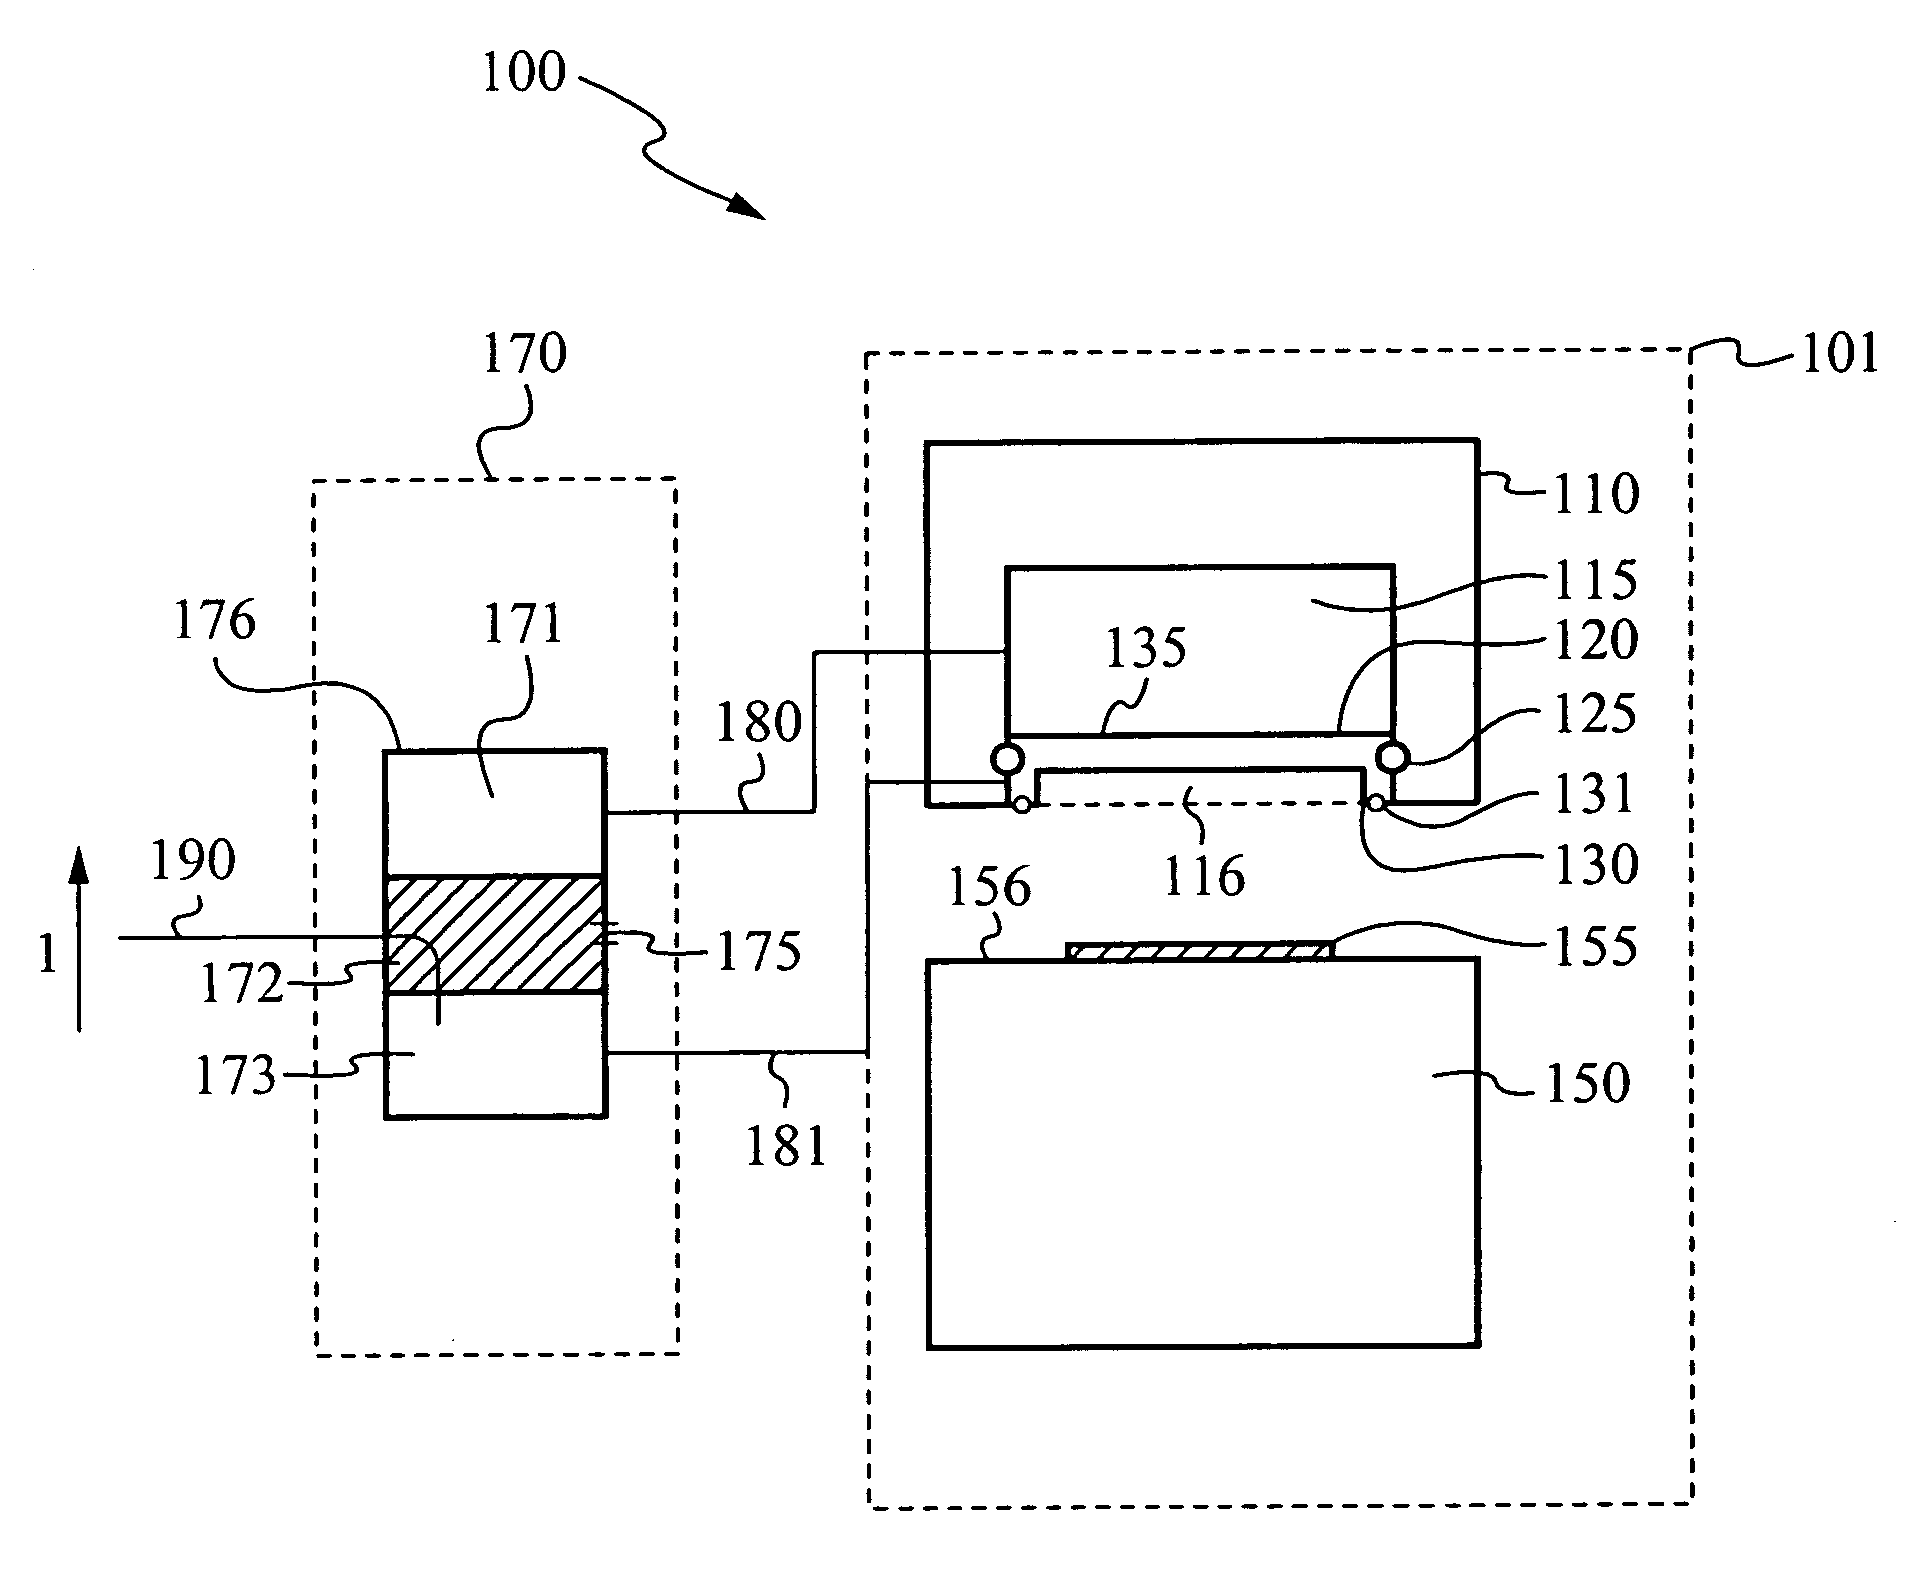 High-pressure processing chamber for a semiconductor wafer